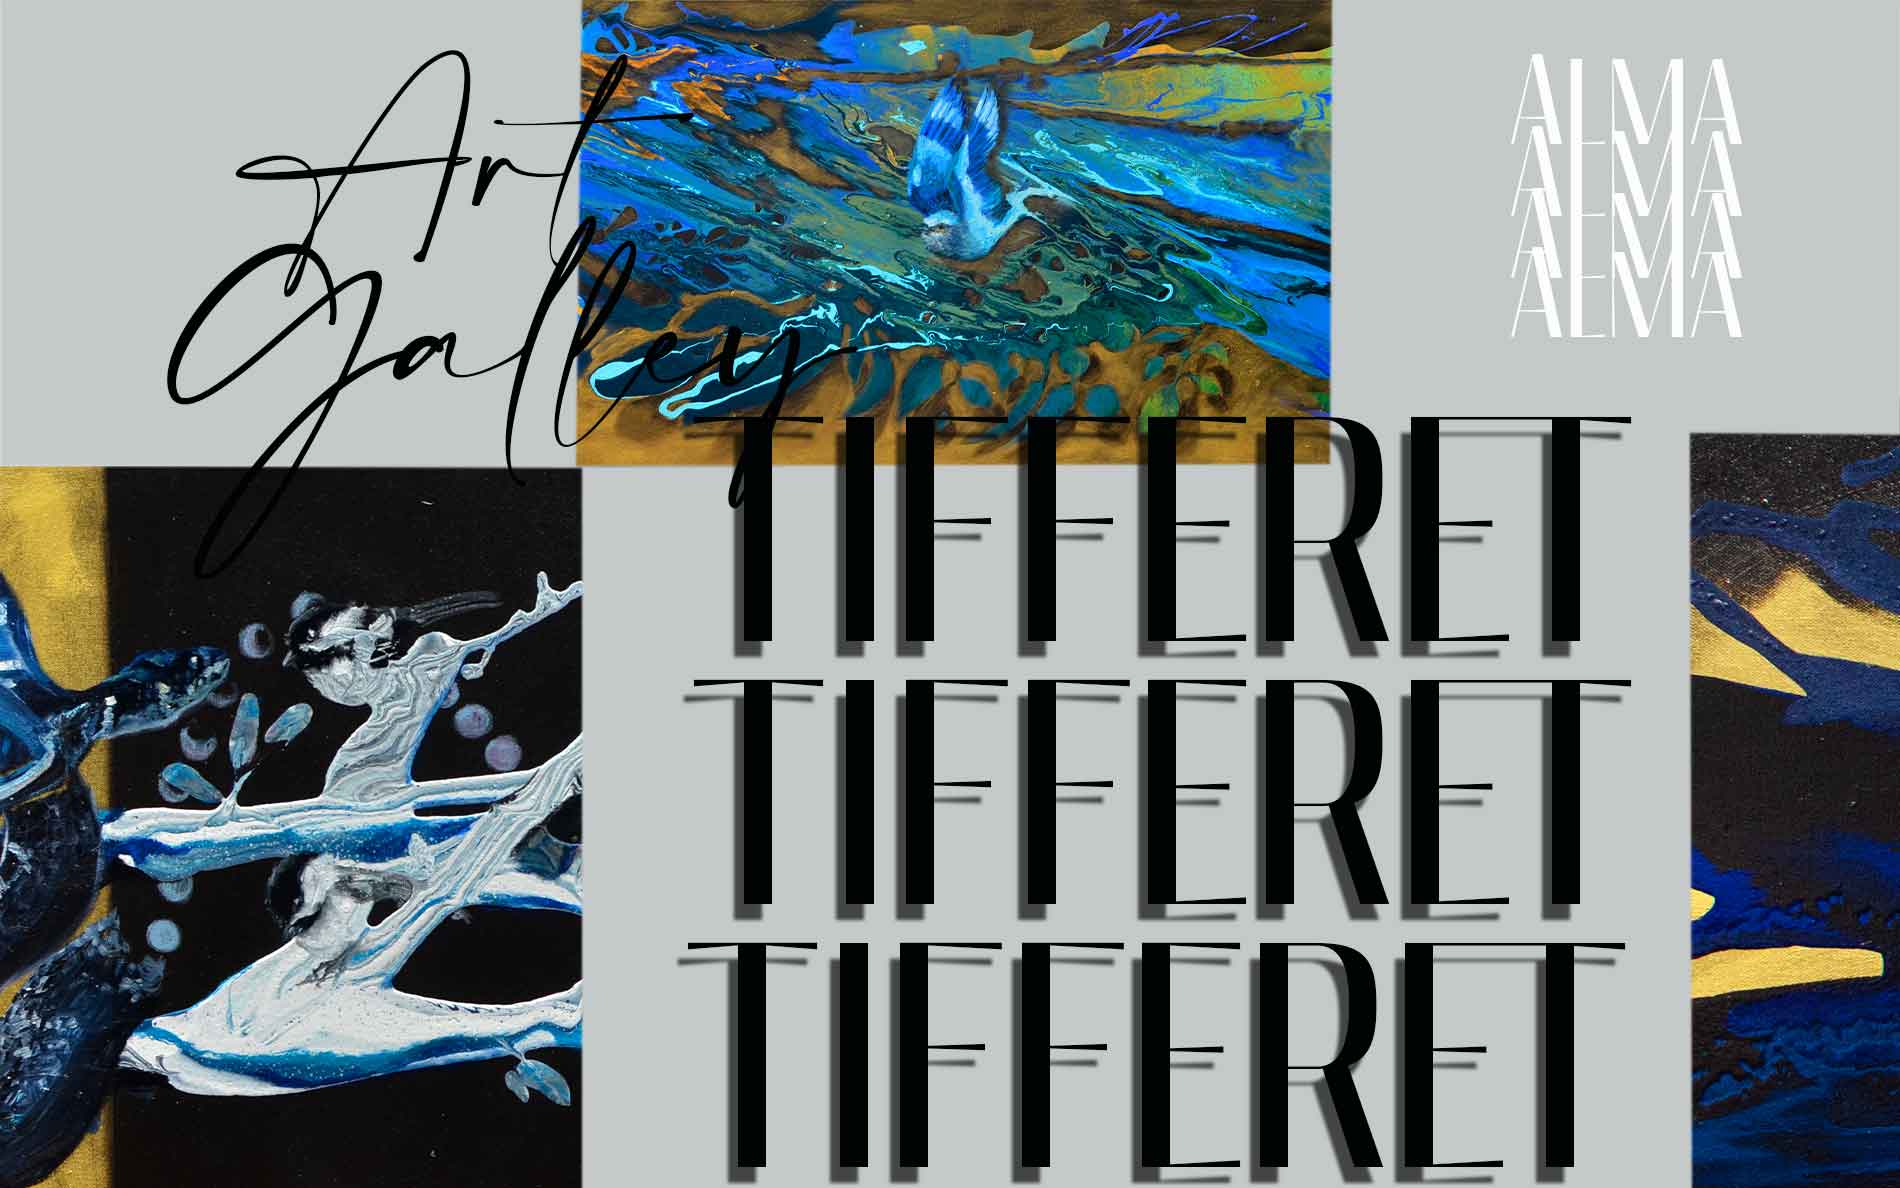 We can appreciate an image with the title called Tifferet which is a series of original paintings for sale by the artist Aldo Acosta Scholz, who exhibits in our art gallery beautiful paintings for sale and prints for sale